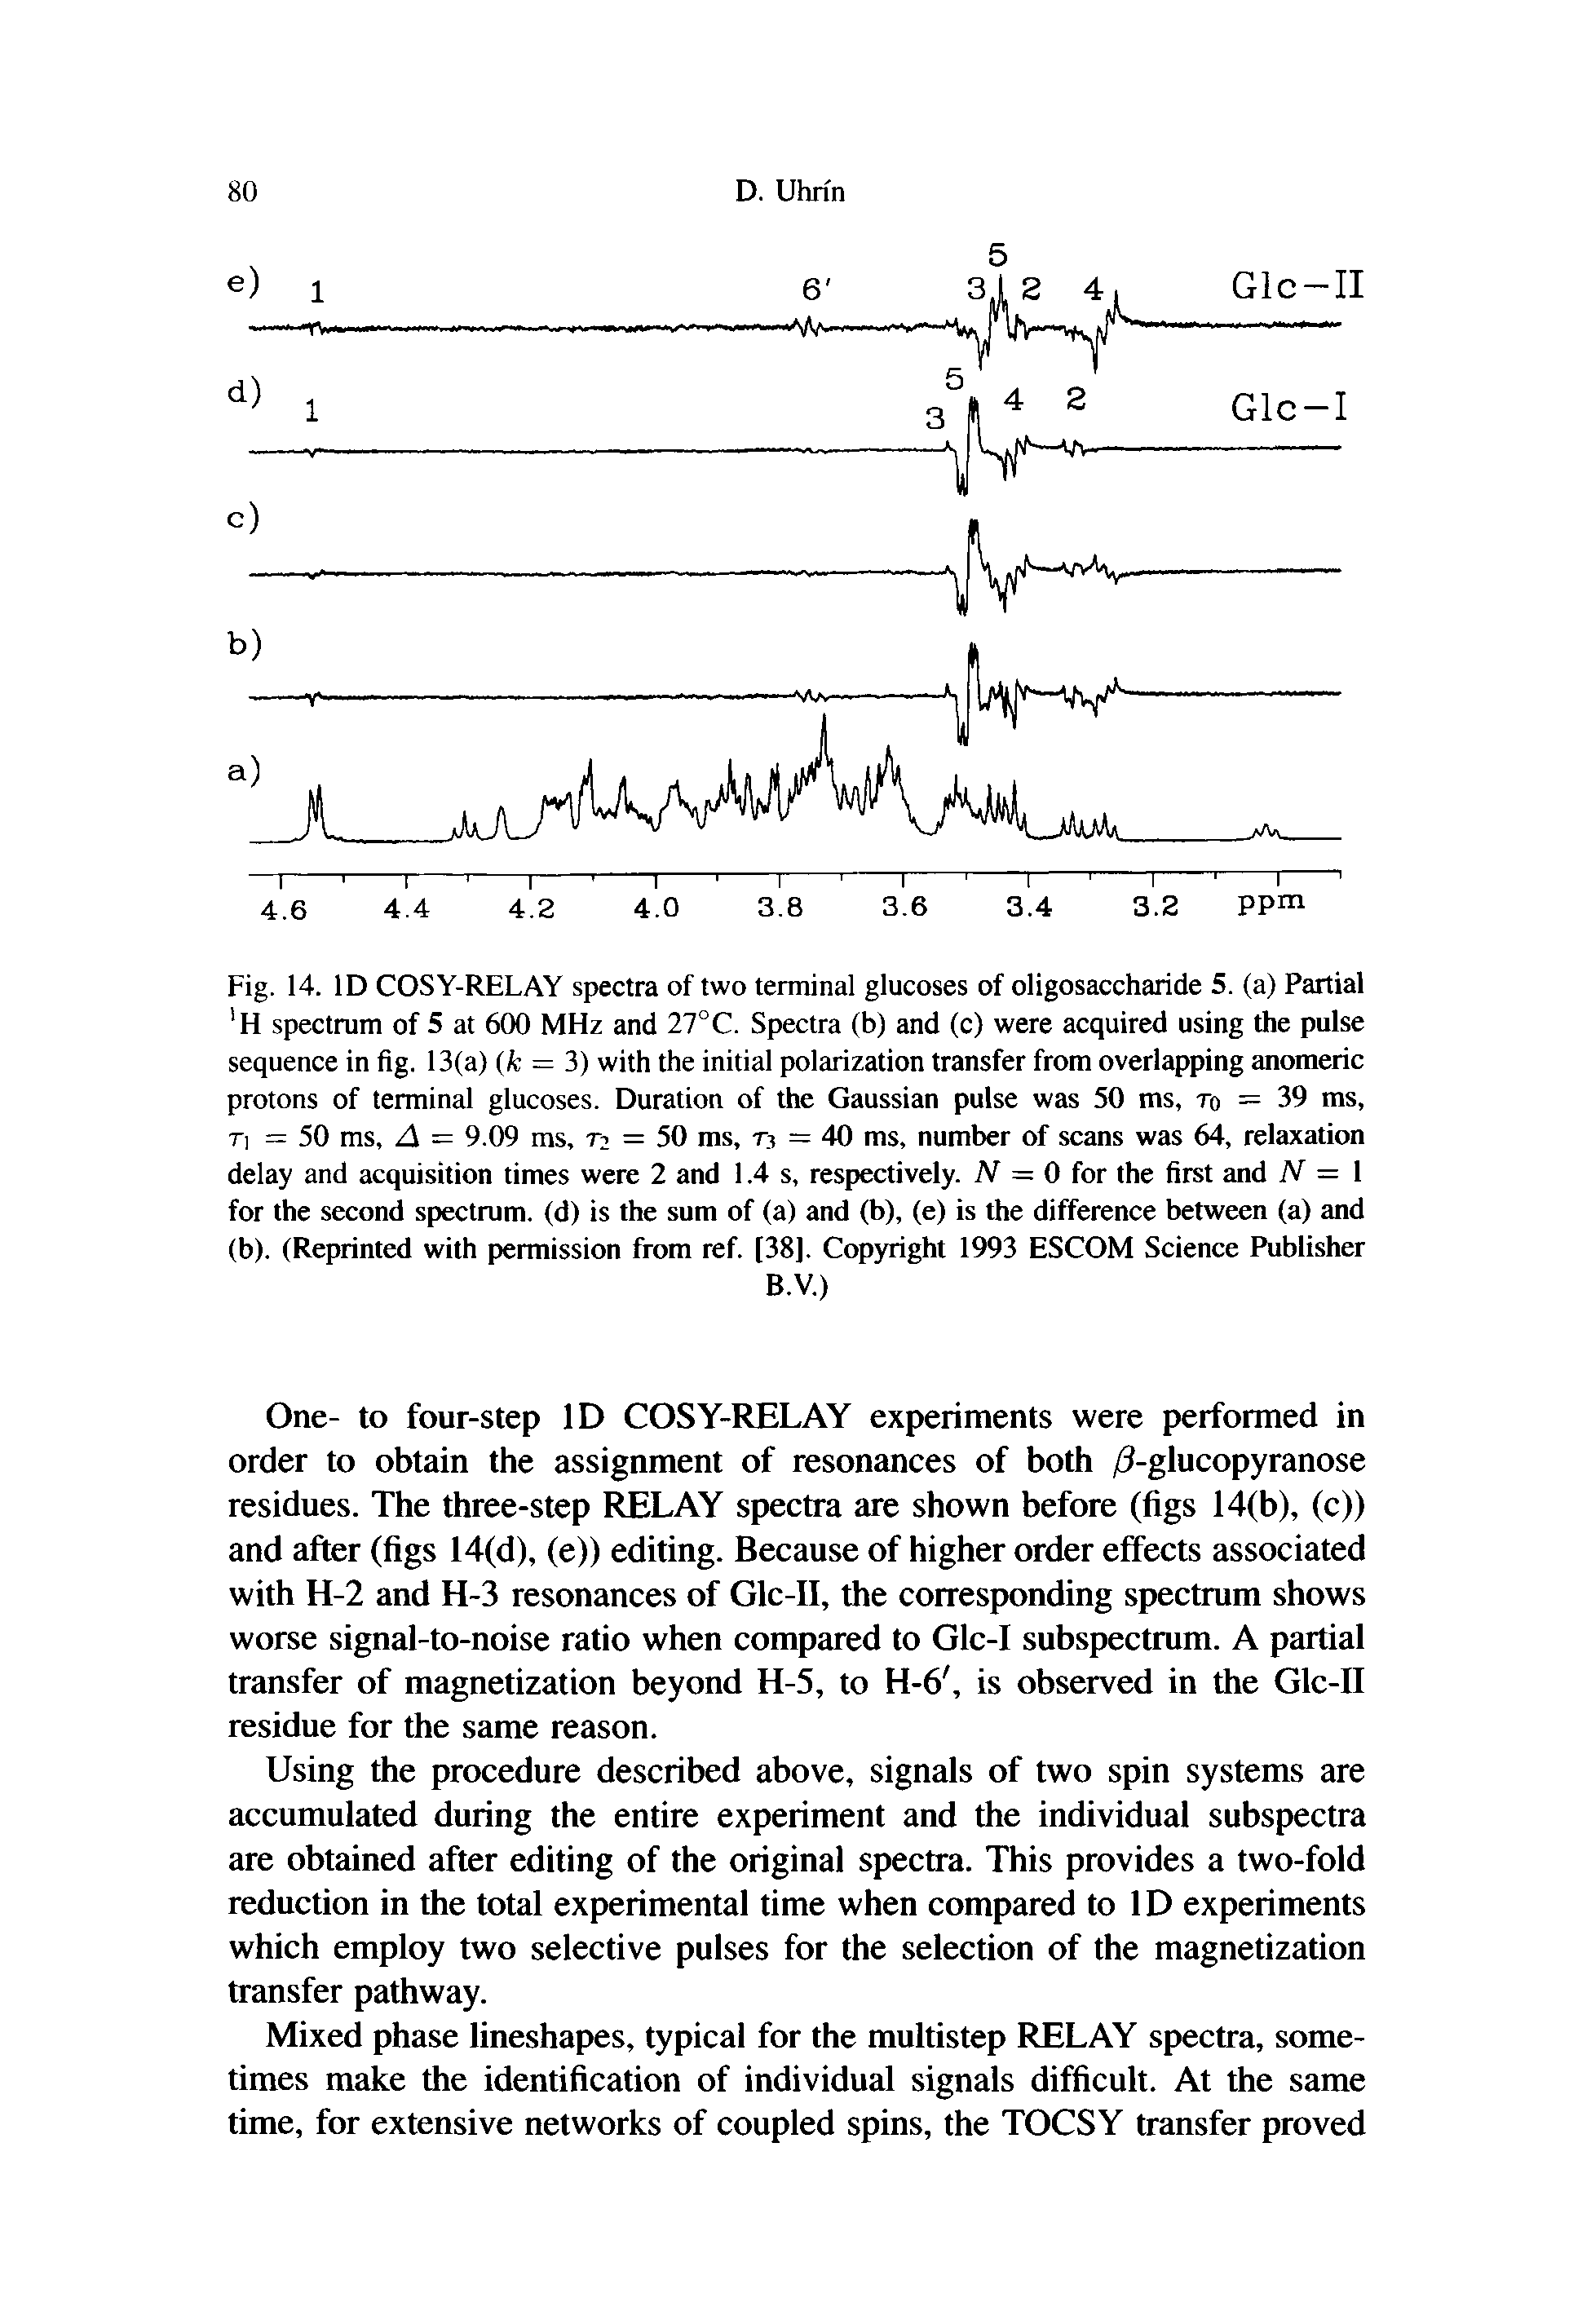 Fig. 14. ID COSY-RELAY spectra of two terminal glucoses of oligosaccharide 5. (a) Partial H spectrum of 5 at 600 MHz and 27°C. Spectra (b) and (c) were acquired using the pulse sequence in fig. 13(a) (k = 3) with the initial polarization transfer from overlapping anomeric protons of terminal glucoses. Duration of the Gaussian pulse was 50 ms, to = 39 ms, T] = 50 ms, A = 9.09 ms, T2 = 50 ms, T3 = 40 ms, number of scans was 64, relaxation delay and acquisition times were 2 and 1.4 s, respectively. AT = 0 for the first and N = 1 for the second spectrum, (d) is the sum of (a) and (b), (e) is the difference between (a) and (b). (Reprinted with permission from ref. [38]. Copyright 1993 ESCOM Science Publisher...